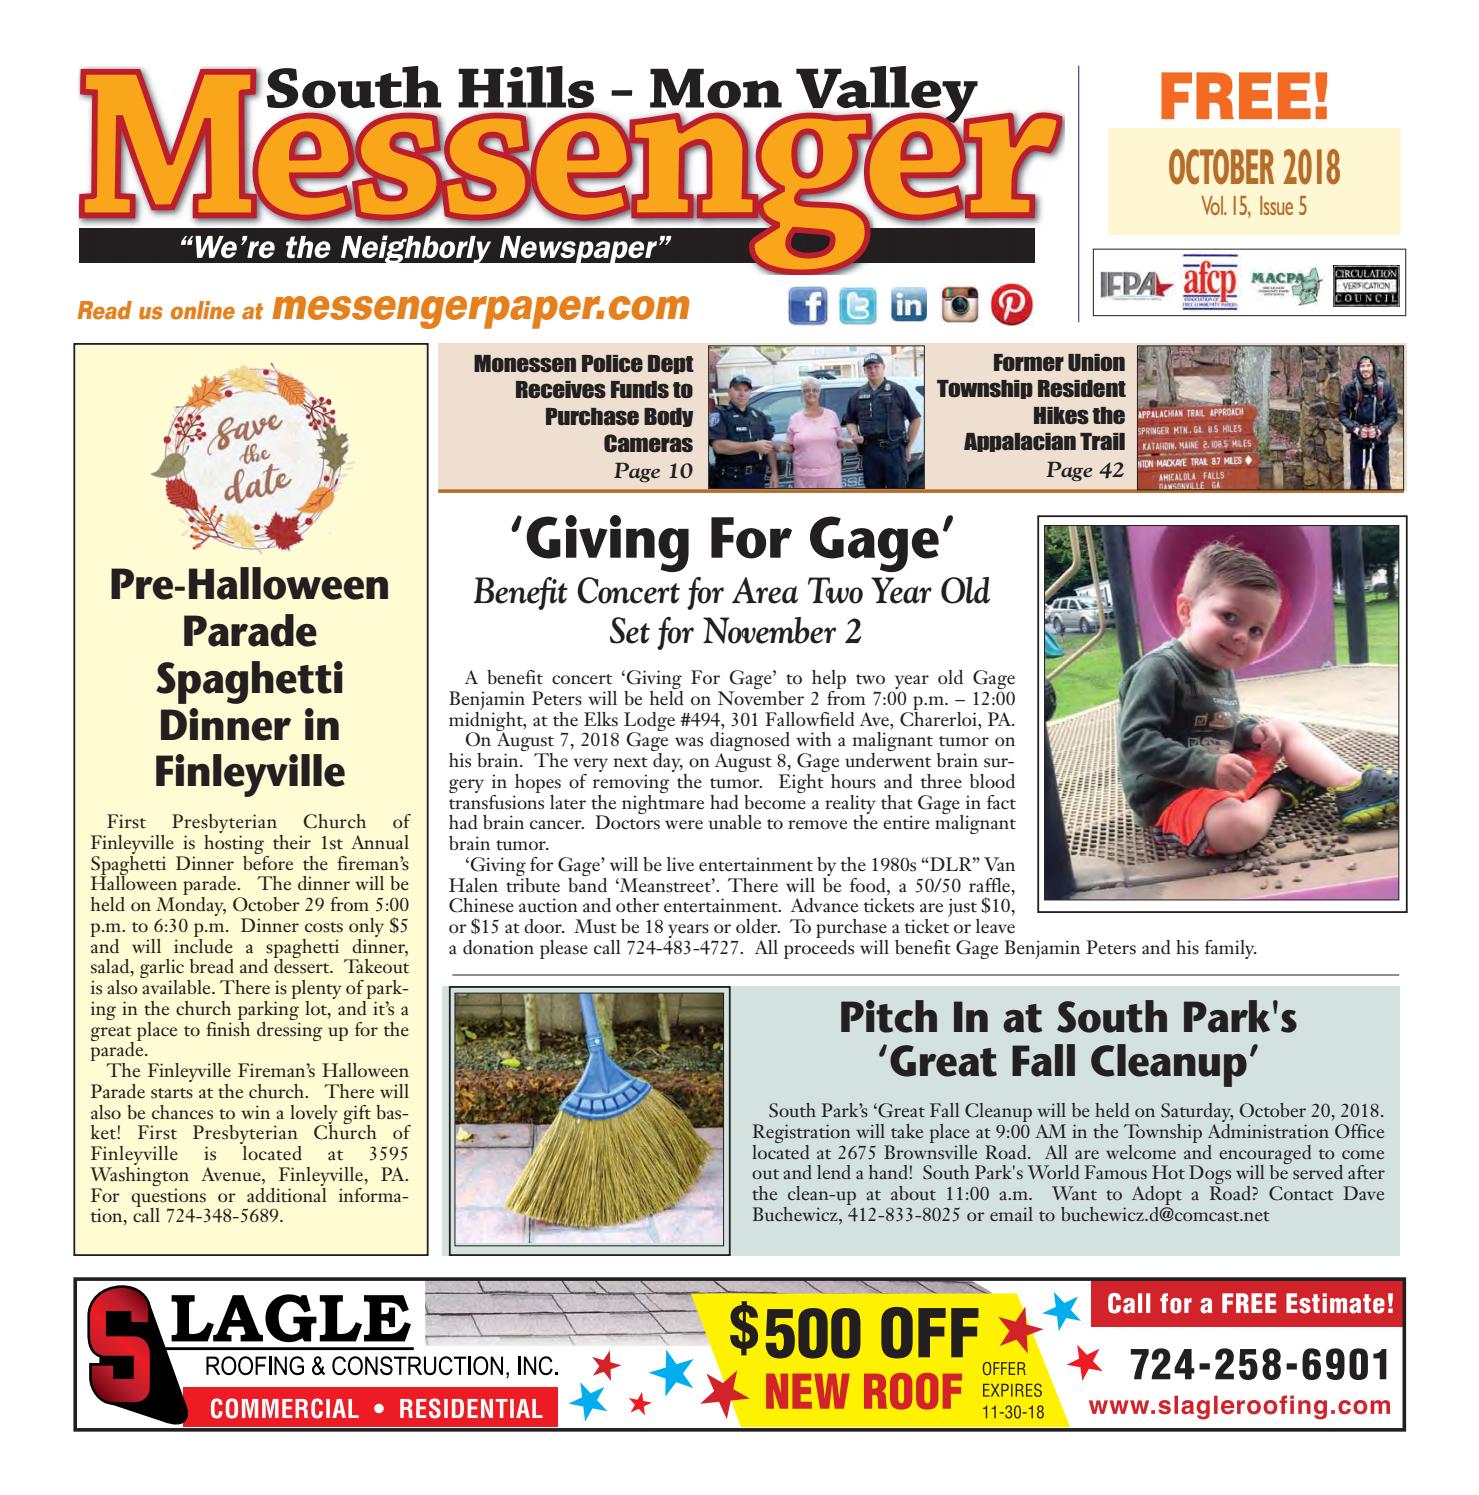 Redstone Tabletop Fireplace Heater Awesome south Hills Mon Valley Messenger October 2018 by south Hills